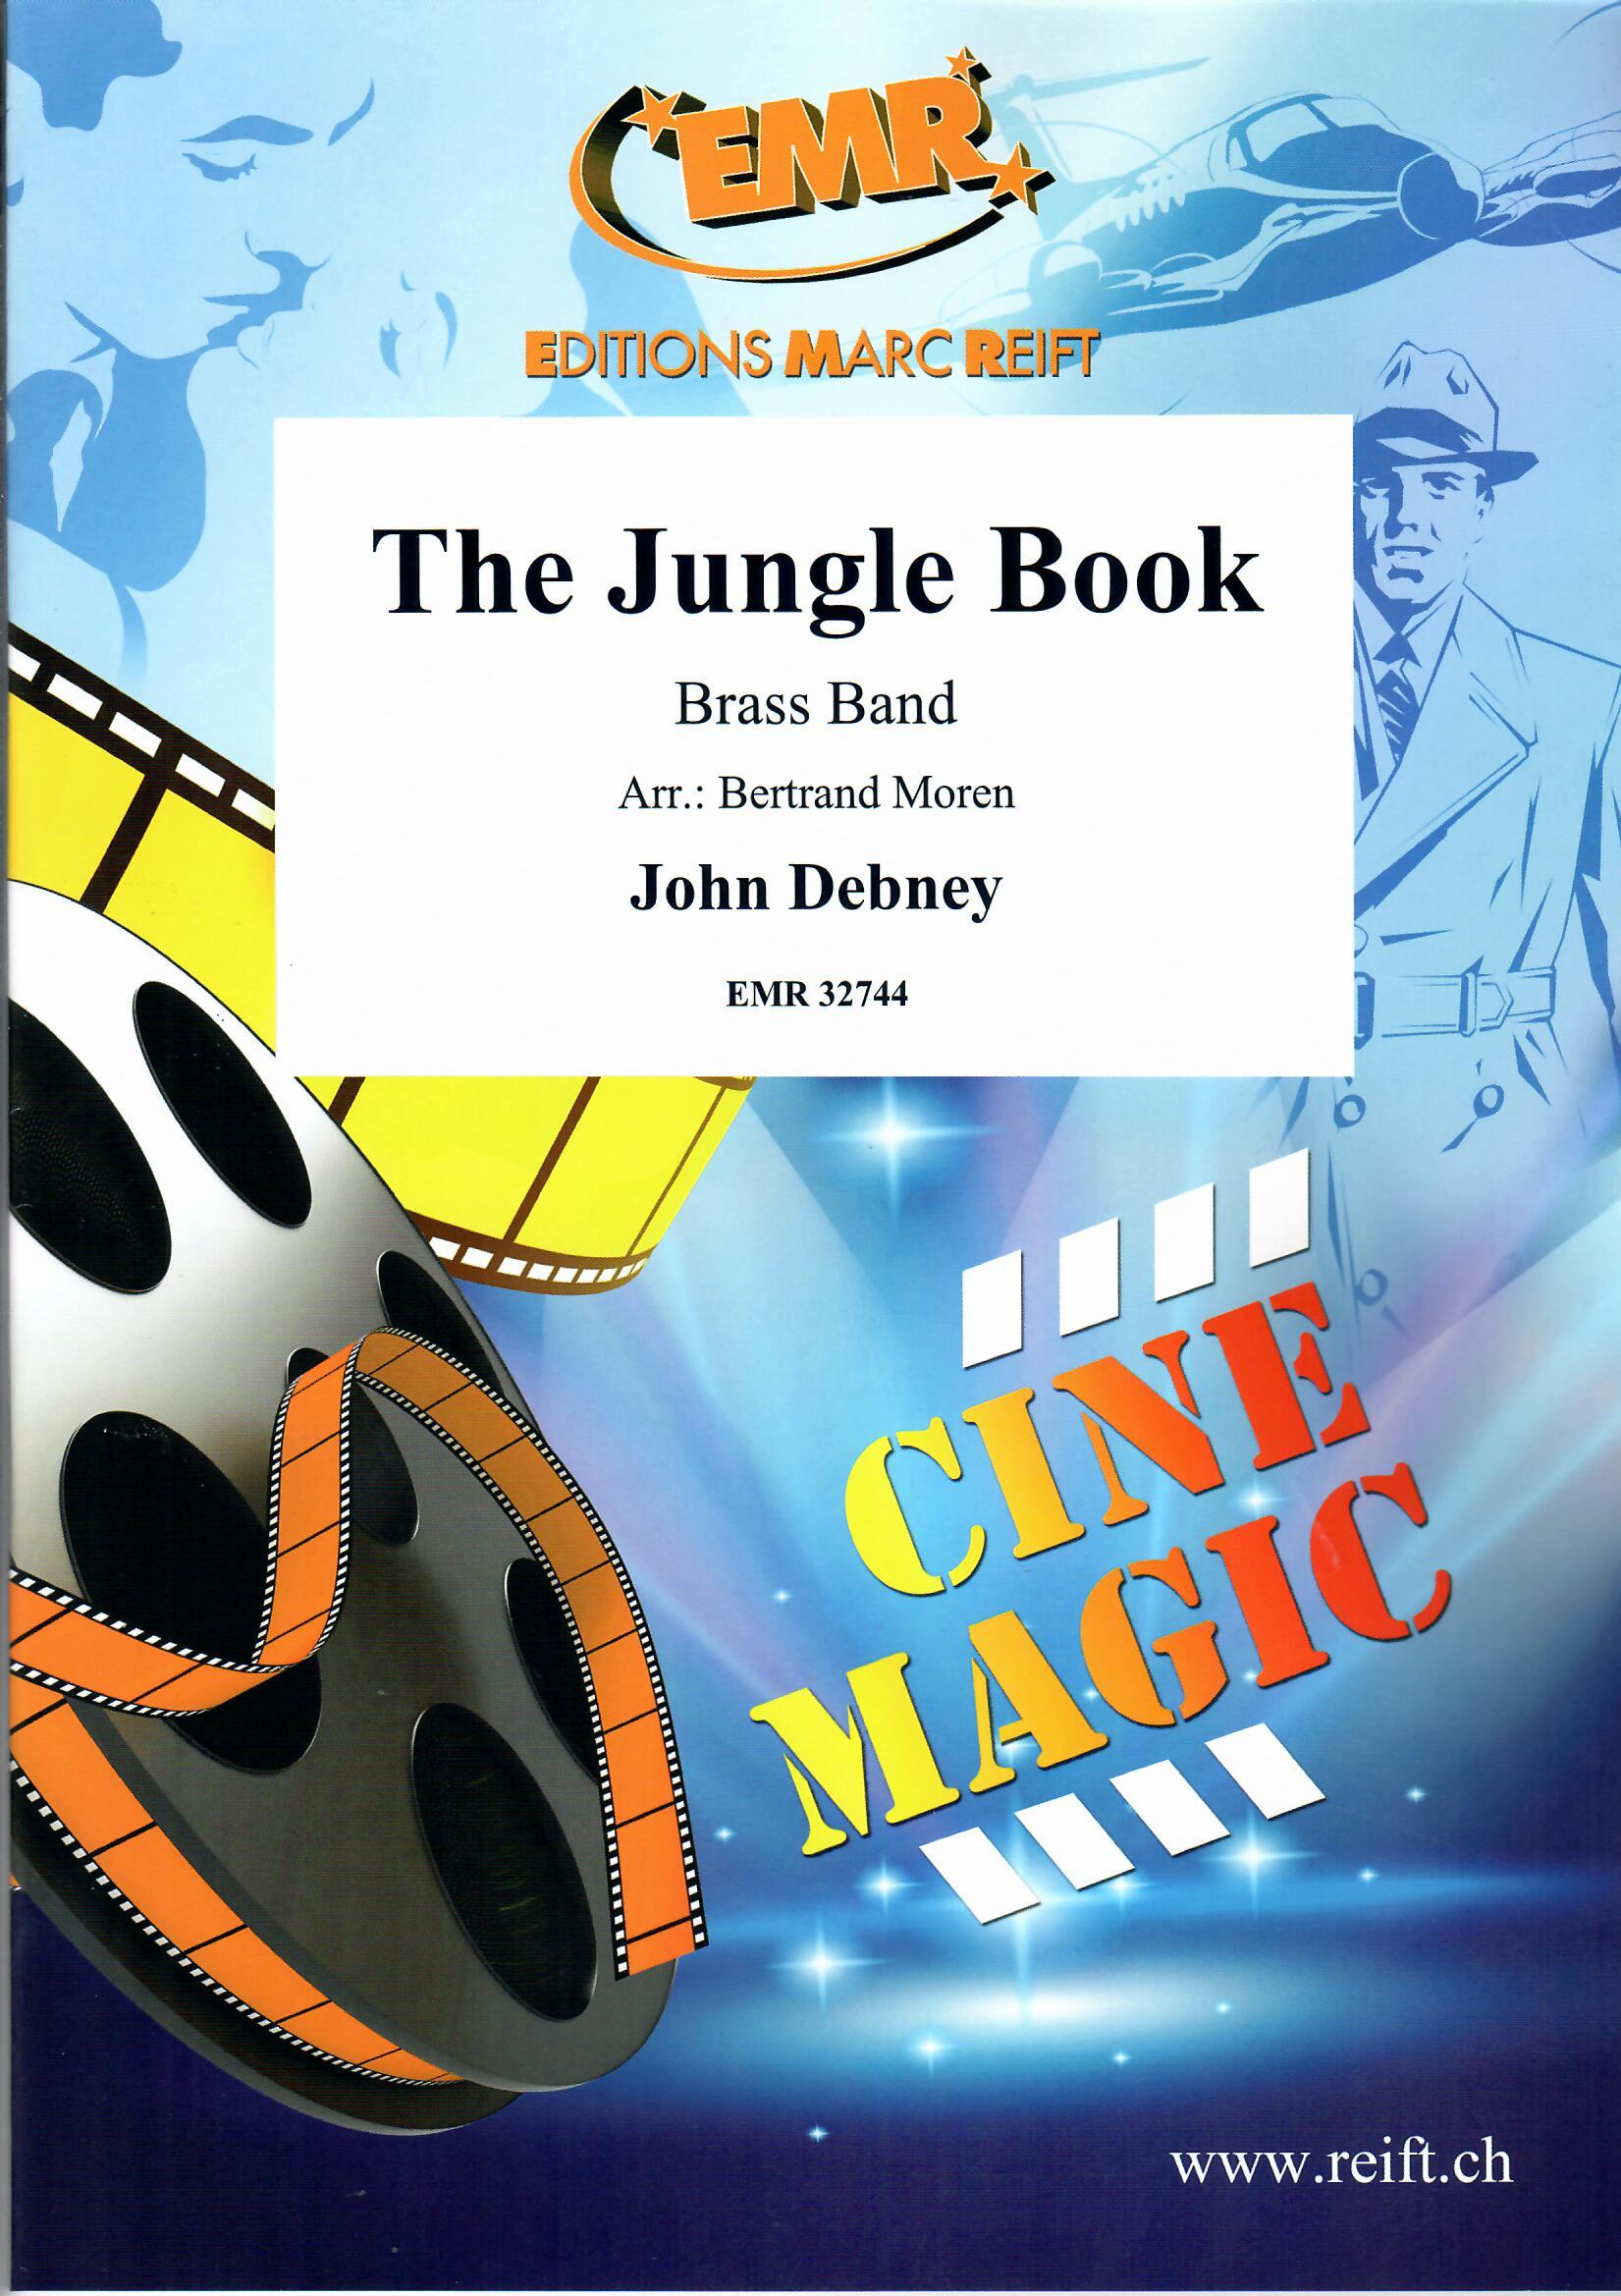 THE JUNGLE BOOK, NEW & RECENT Publications, FILM MUSIC & MUSICALS